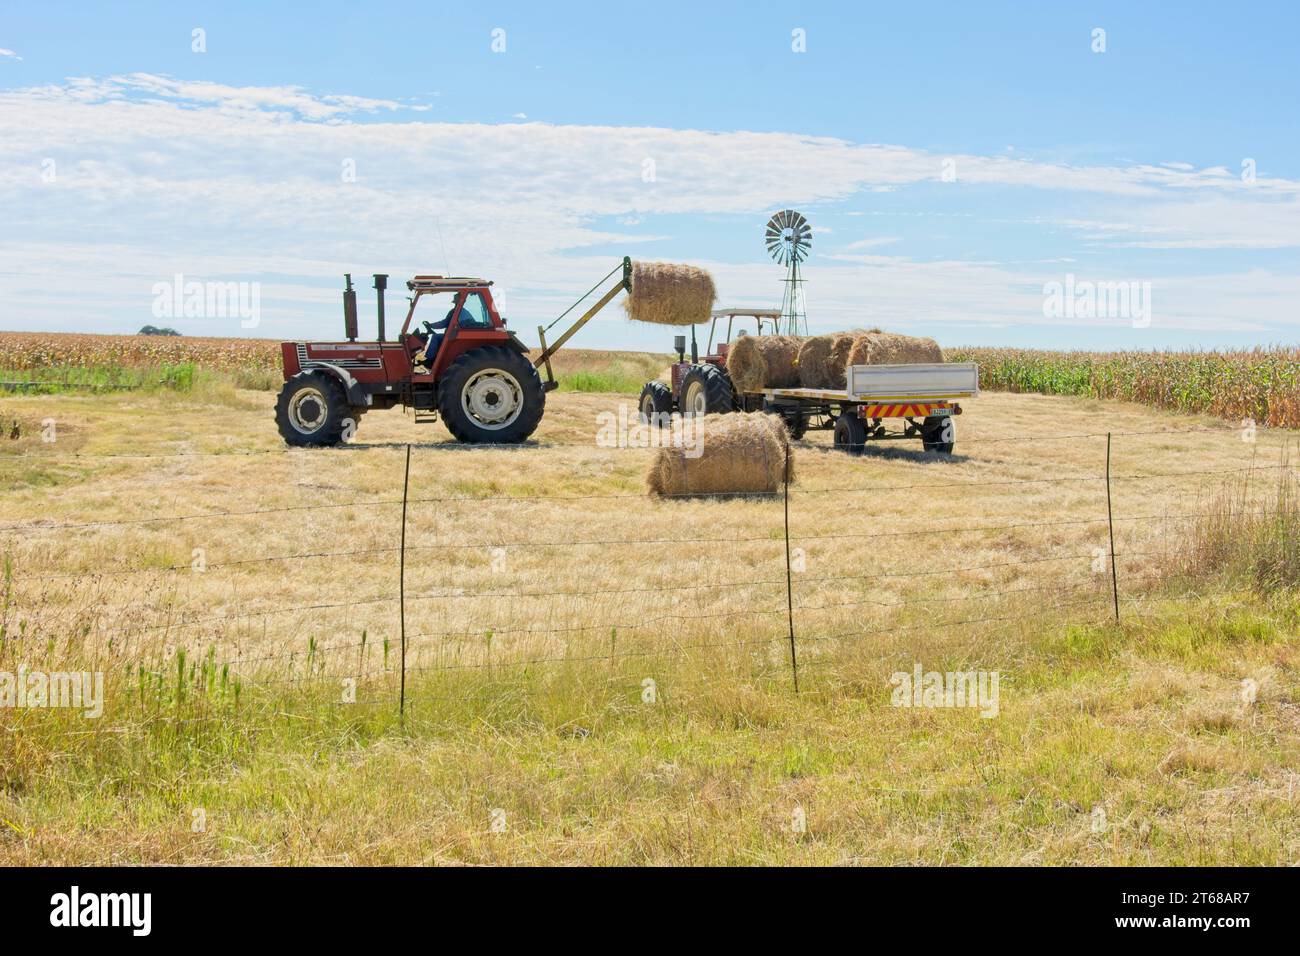 Villiers, South Africa - February 25, 2015 : Bales of hay being loaded onto trailer on farm with maize and windmill in the background. Stock Photo